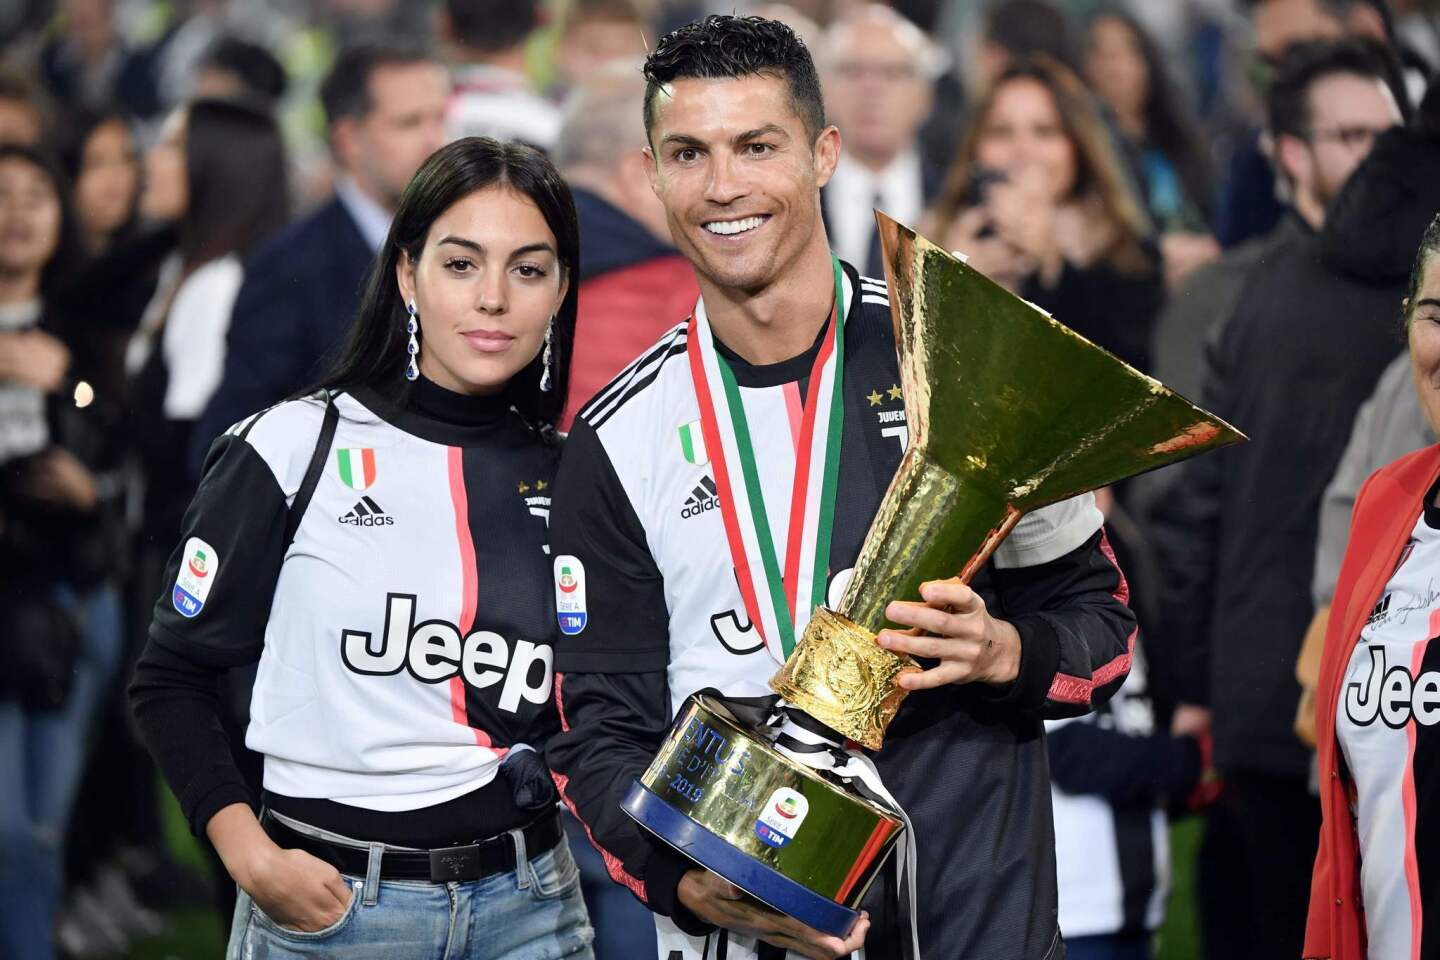 Juventus' Portuguese forward Cristiano Ronaldo holds the Italian Champion's trophy next to his wife Georgina at the end of the Italian Serie A football match Juventus vs Atalanta on May 19, 2019 at the Allianz stadium in Turin. (Photo by Marco Bertorello / AFP)MARCO BERTORELLO/AFP/Getty Images ** OUTS - ELSENT, FPG, CM - OUTS * NM, PH, VA if sourced by CT, LA or MoD **